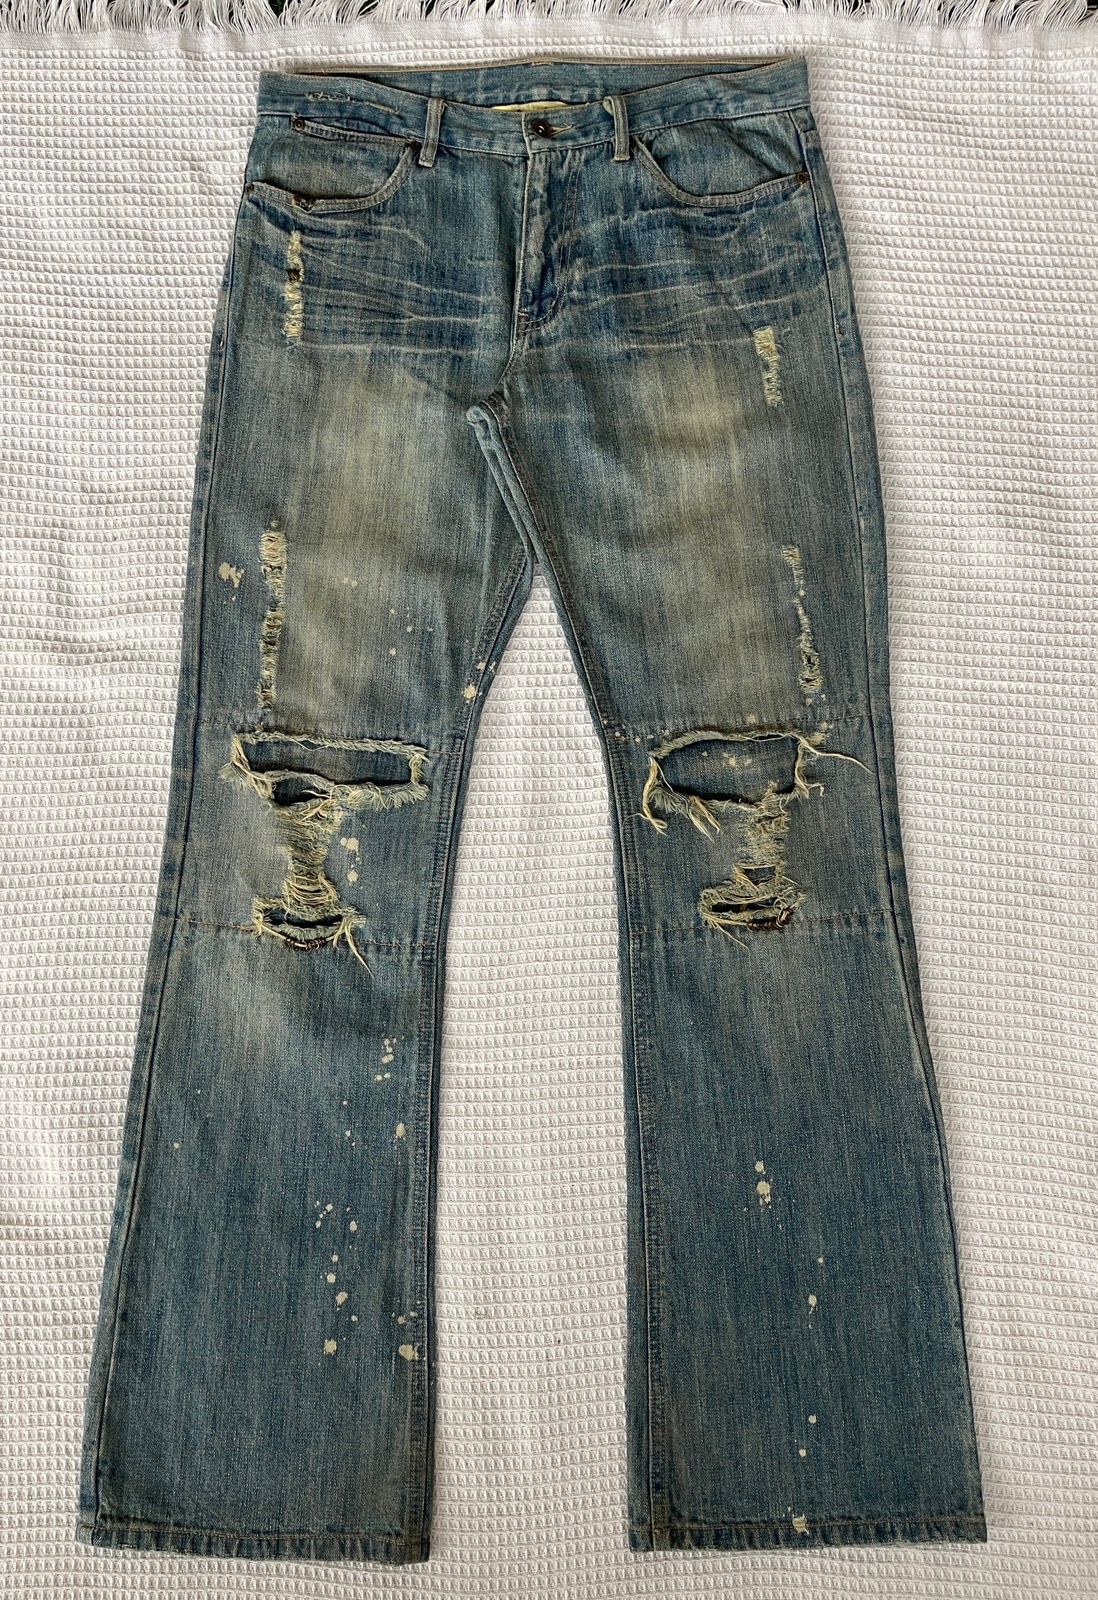 Pre-owned Hysteric Glamour X Tornado Mart Japan Crazyvintage'90sdistressed Flare Denim Jeans In Light Blue Wash